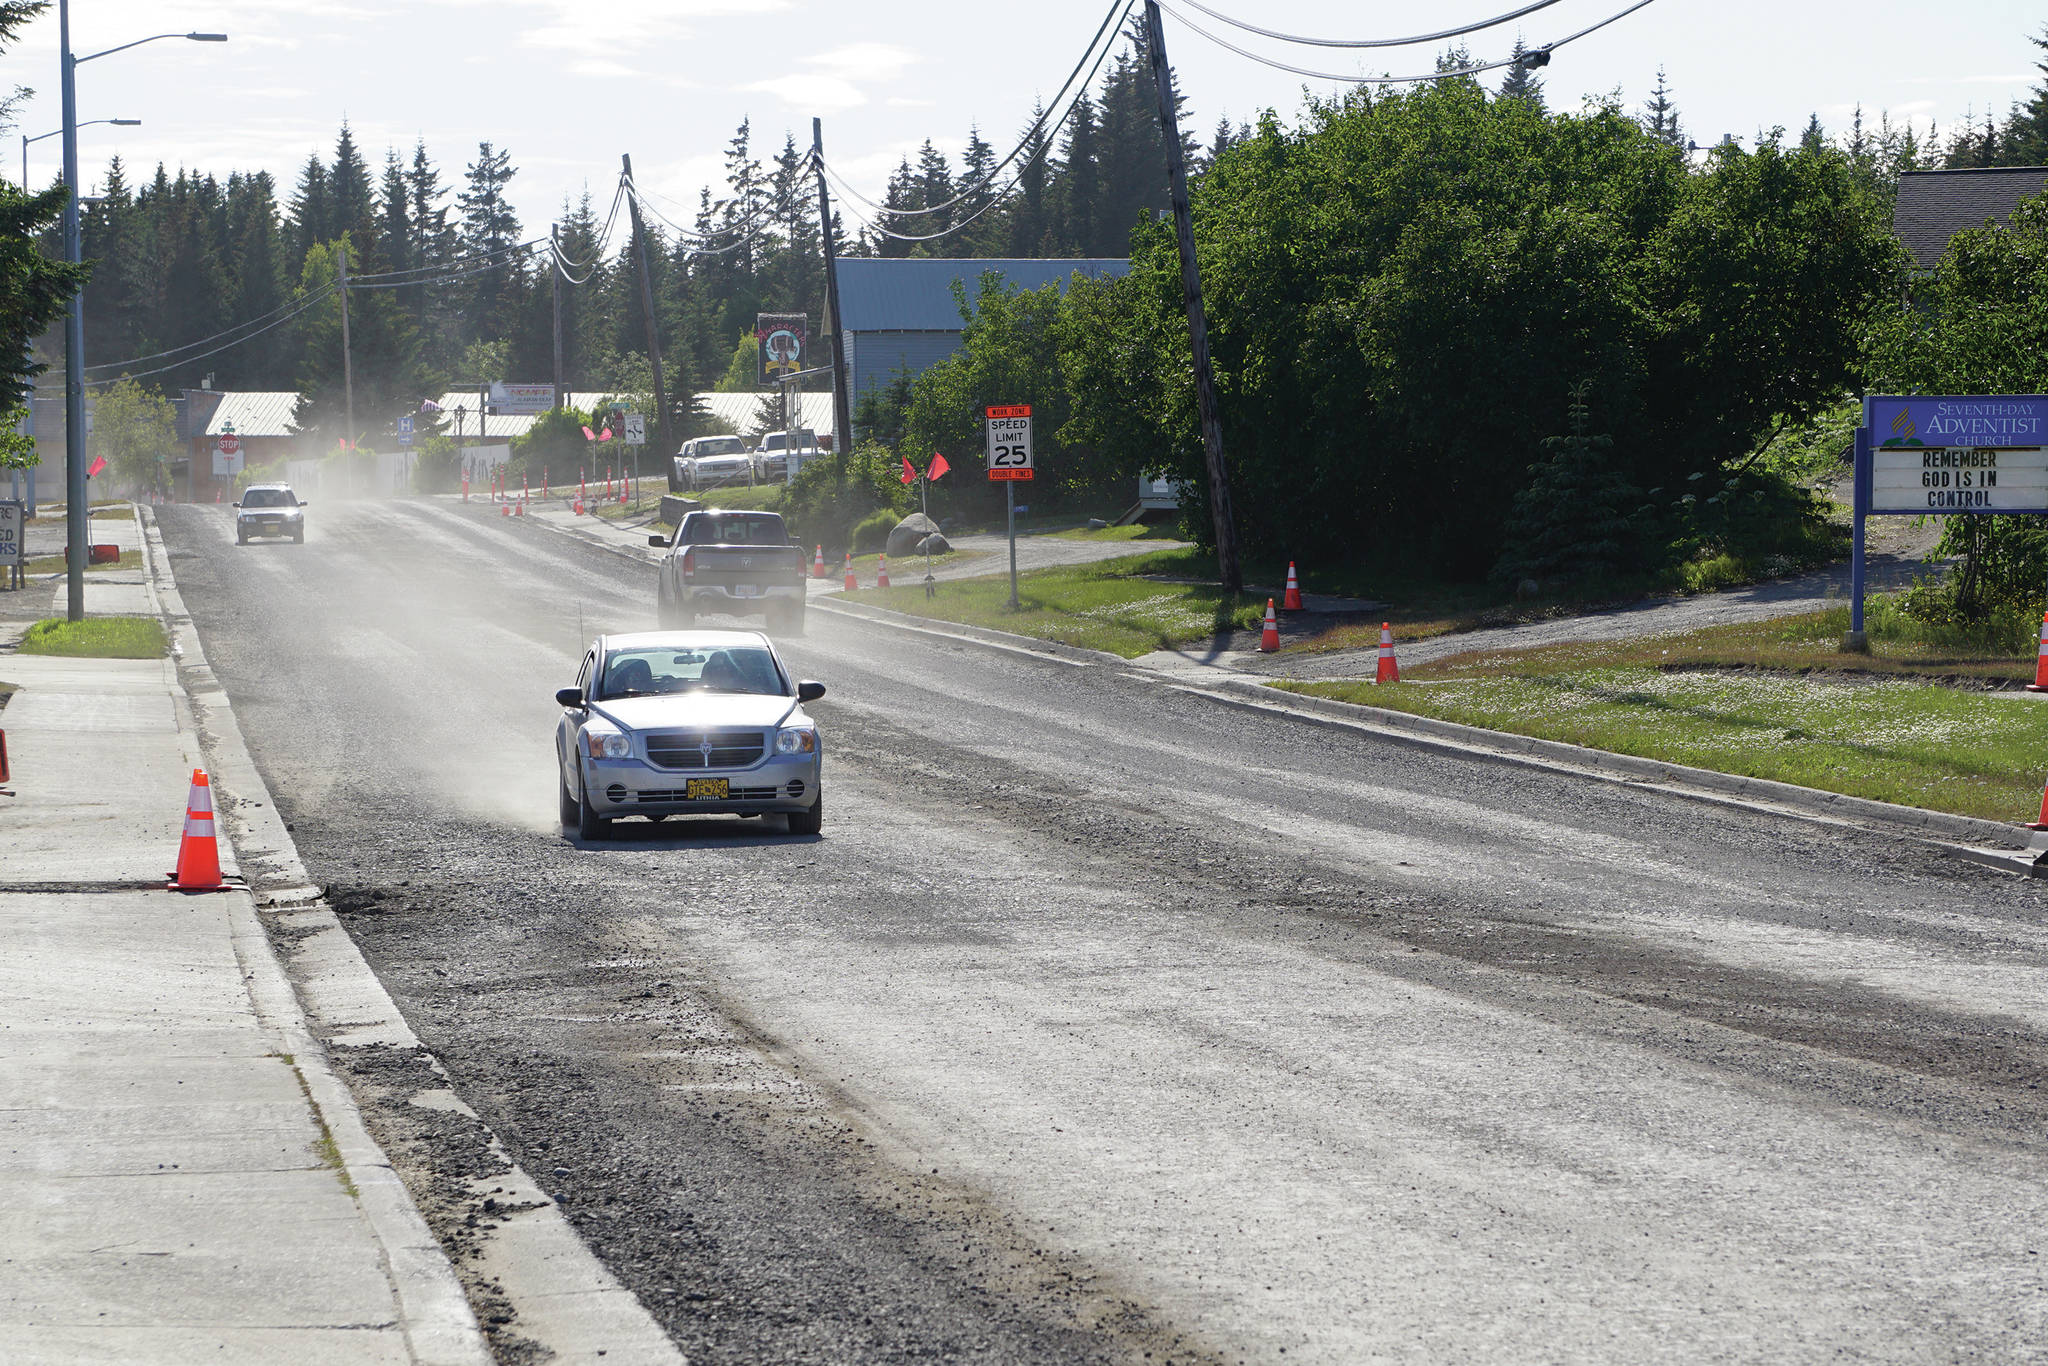 A driver heads east on Pioneer Avenue toward Svedlund Street on Monday, June 22, 2020, in Homer, Alaska. The road has been torn up as part of a repaving project for Pioneer Avenue. (Photo by Michael Armstrong/Homer News)